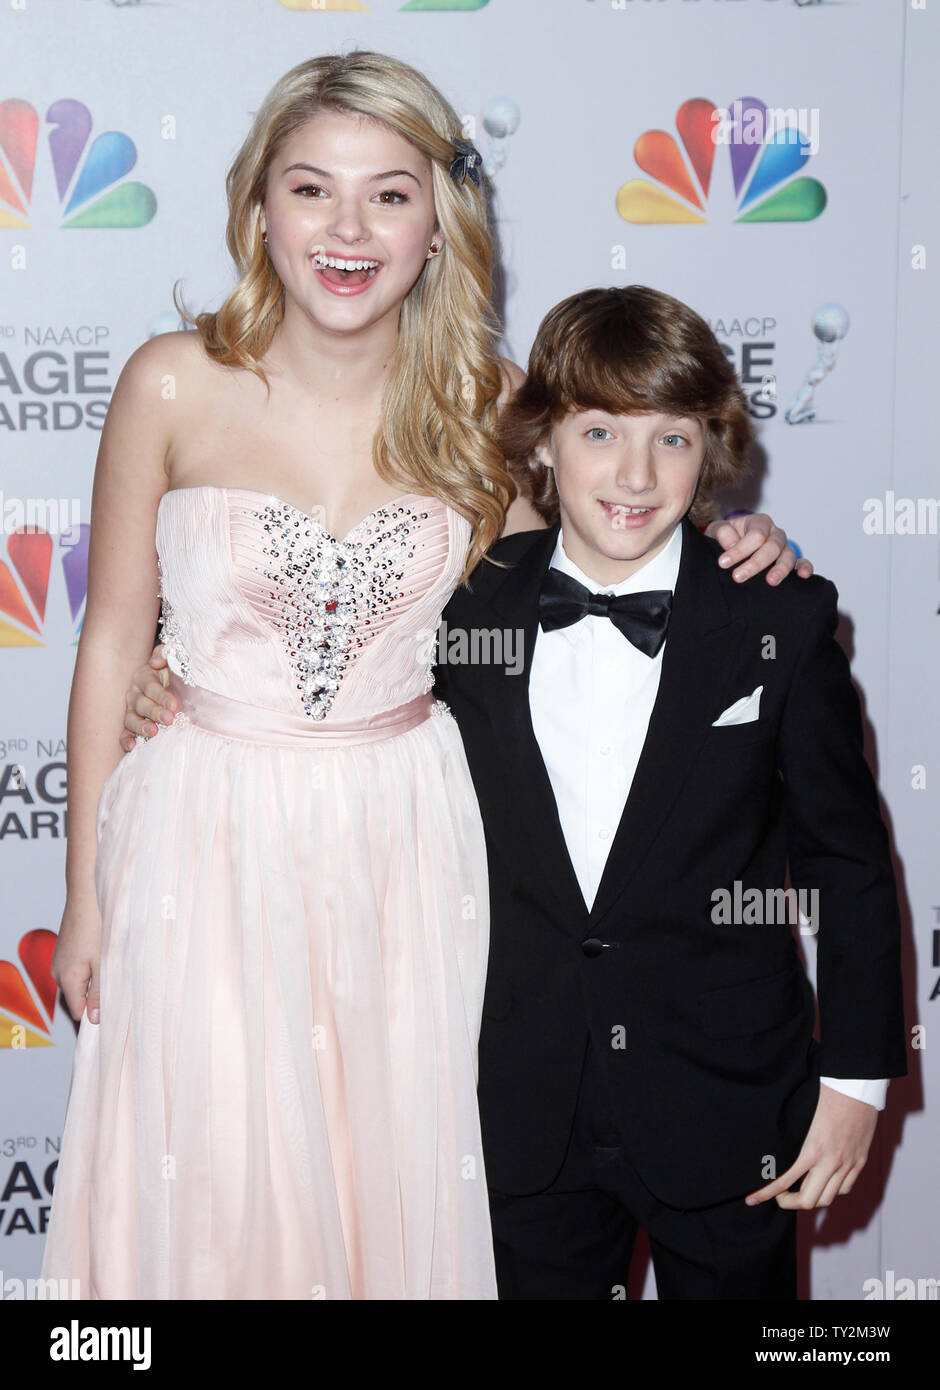 Actress Stefanie Scott and actor Jake Short arrive at the 43rd NAACP Image  Awards at the Shrine Auditorium in Los Angeles on February 17, 2012.  UPI/Danny Moloshok Stock Photo - Alamy